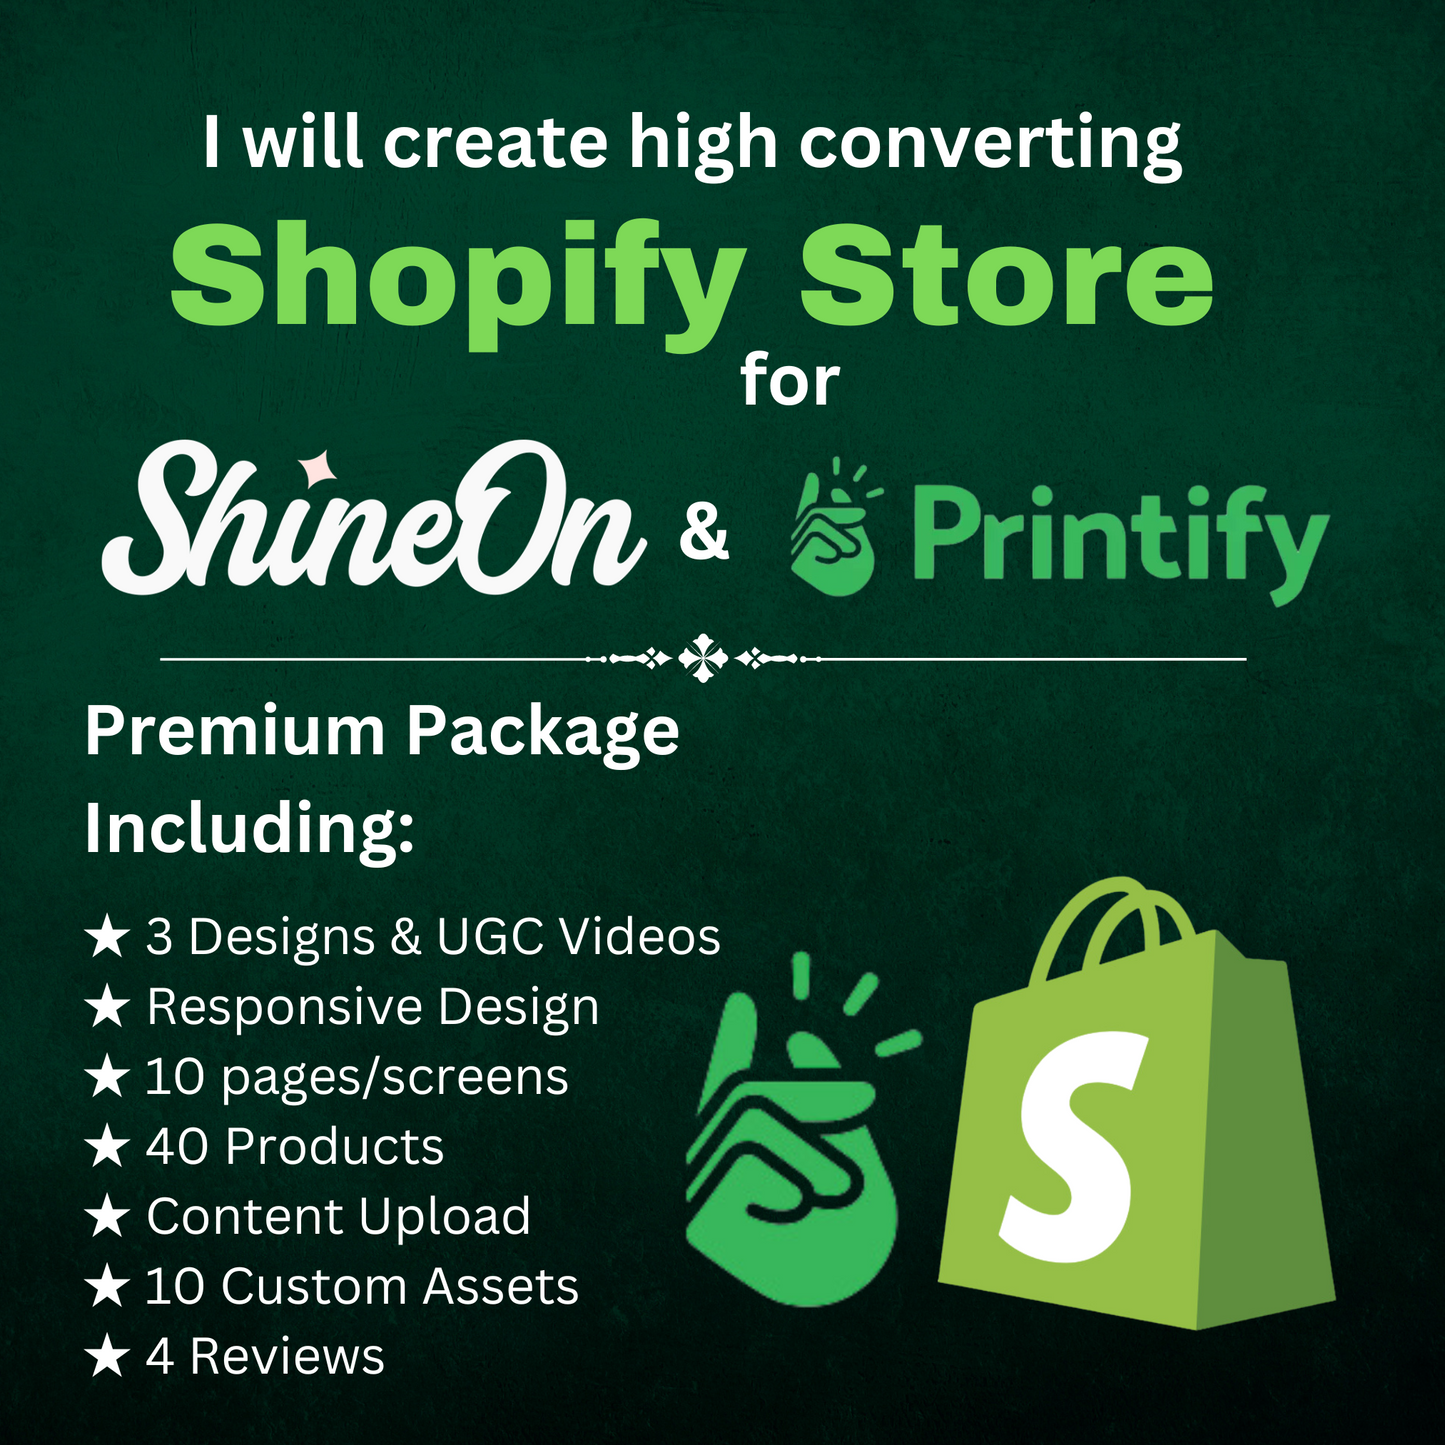 High Converting Shopify Store Design For ShineOn Jewelry or Printify Product